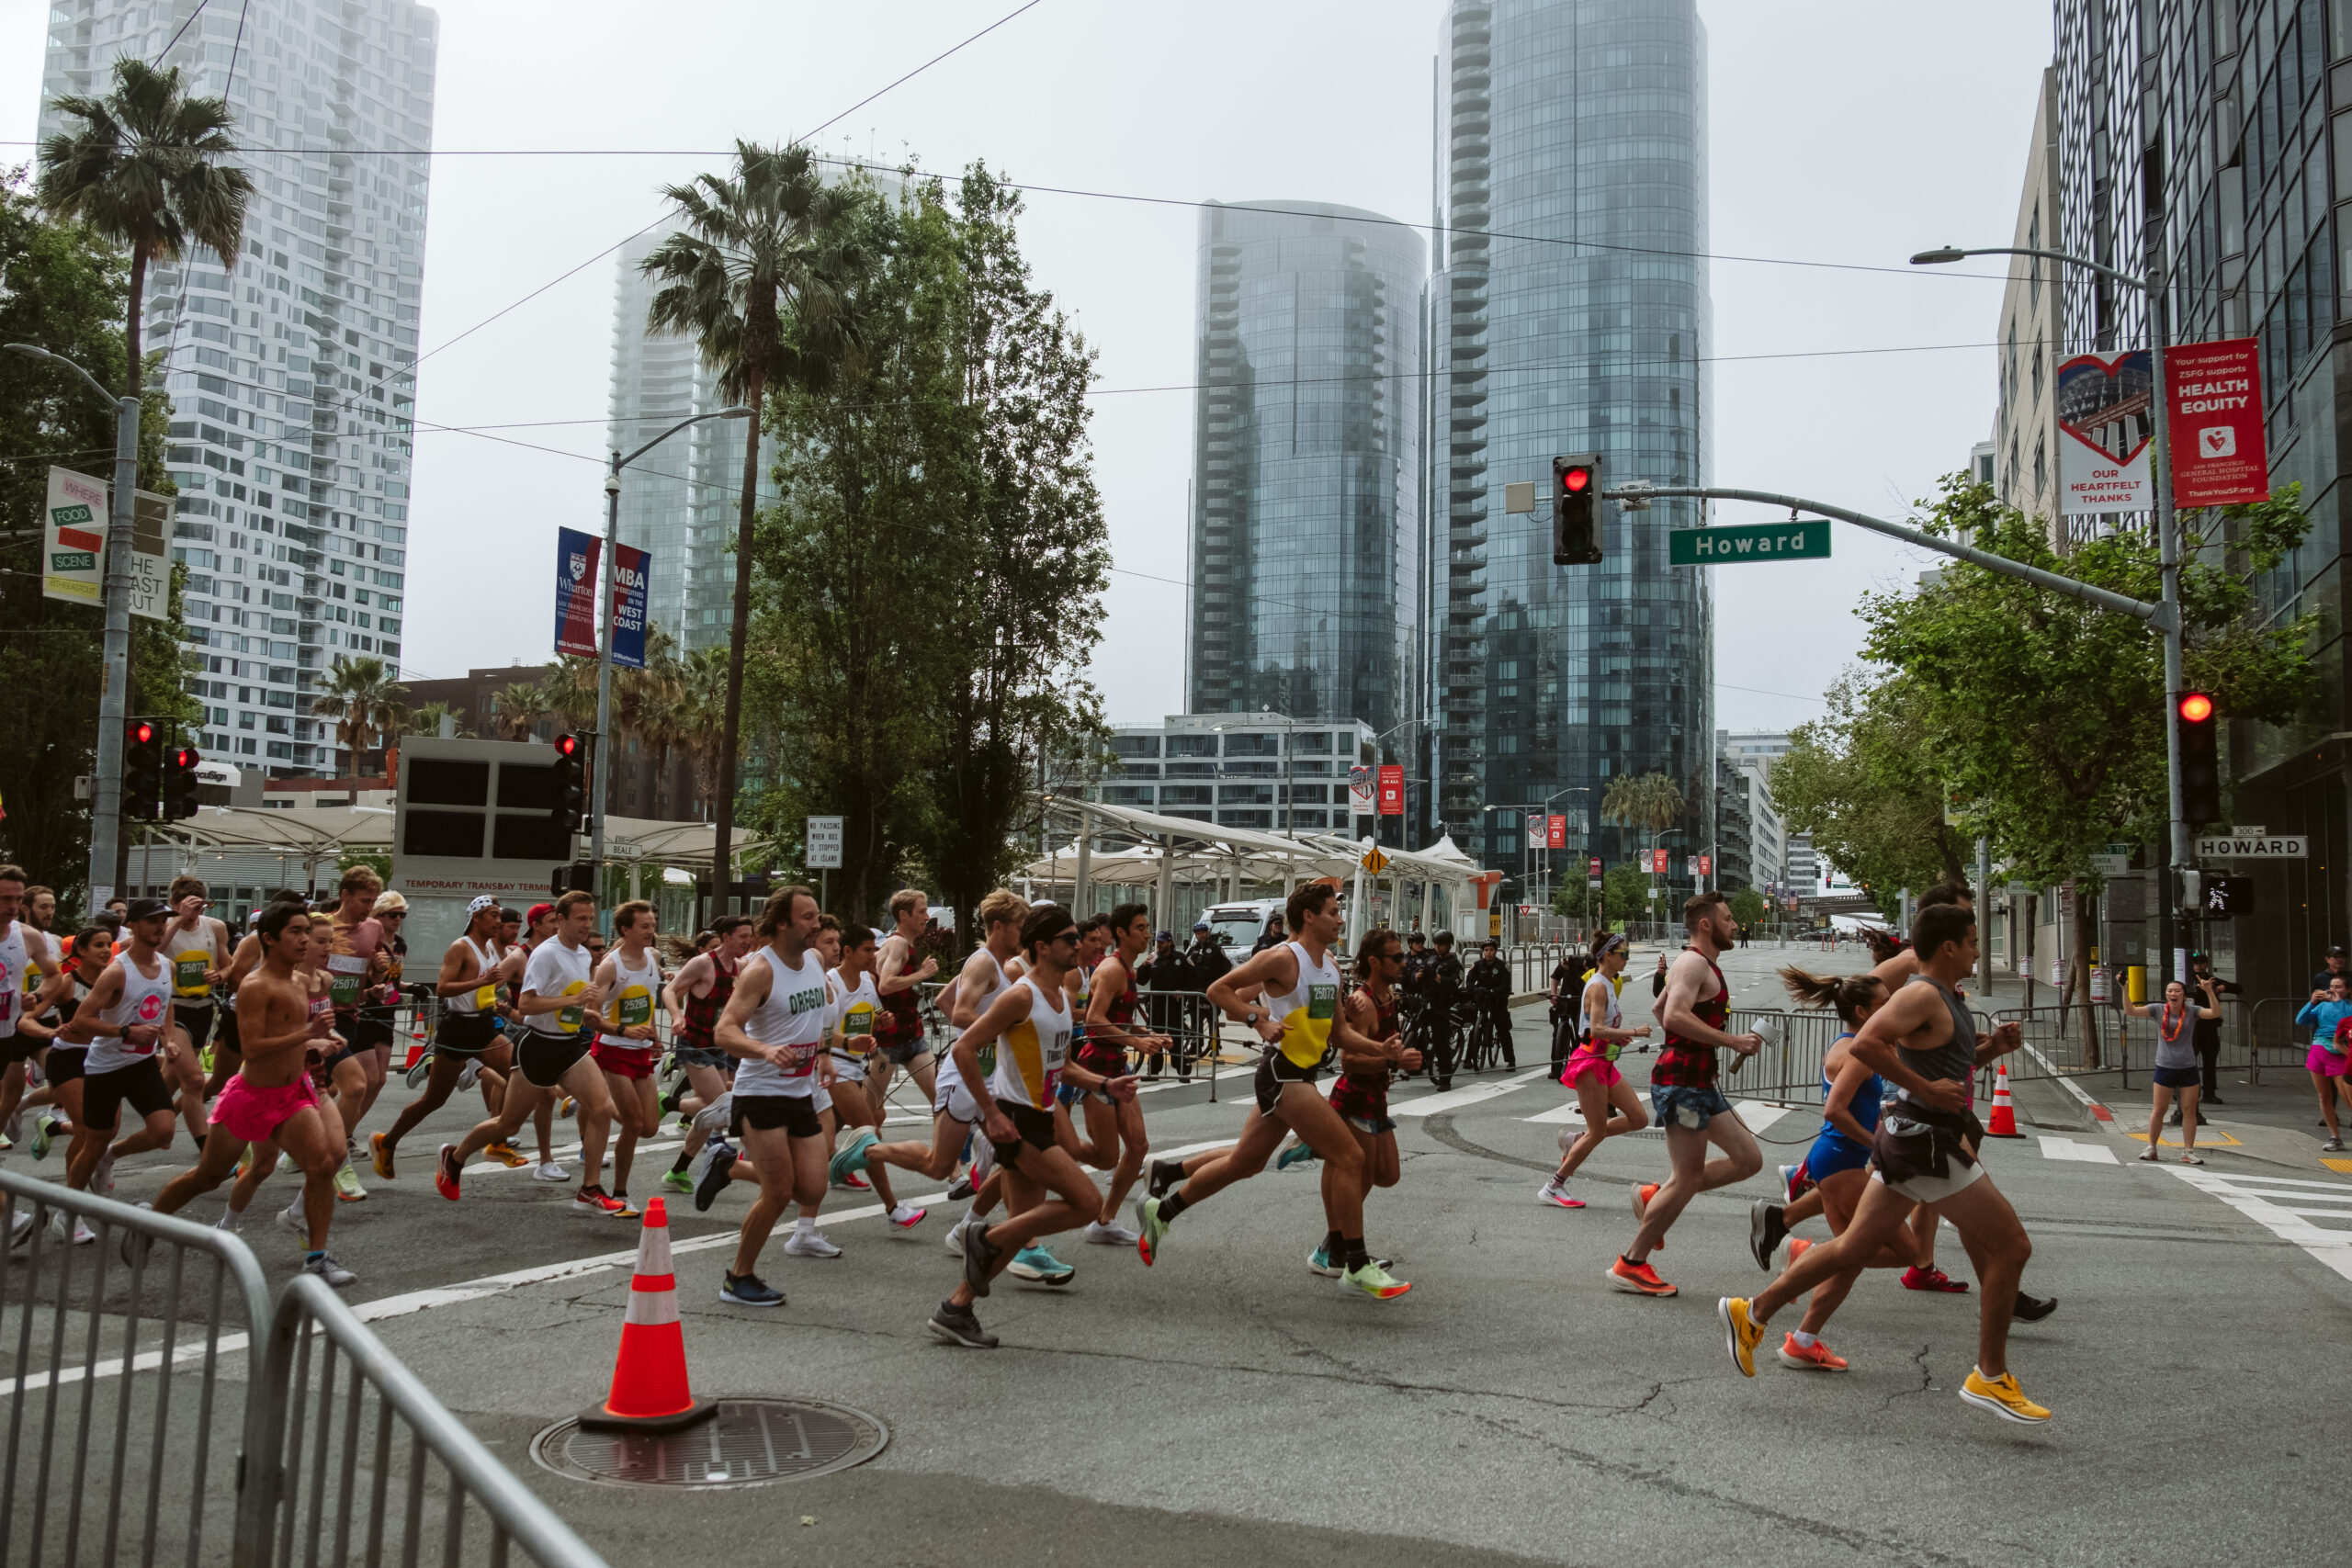 People run through a closed intersection with high-rise buildings in the background